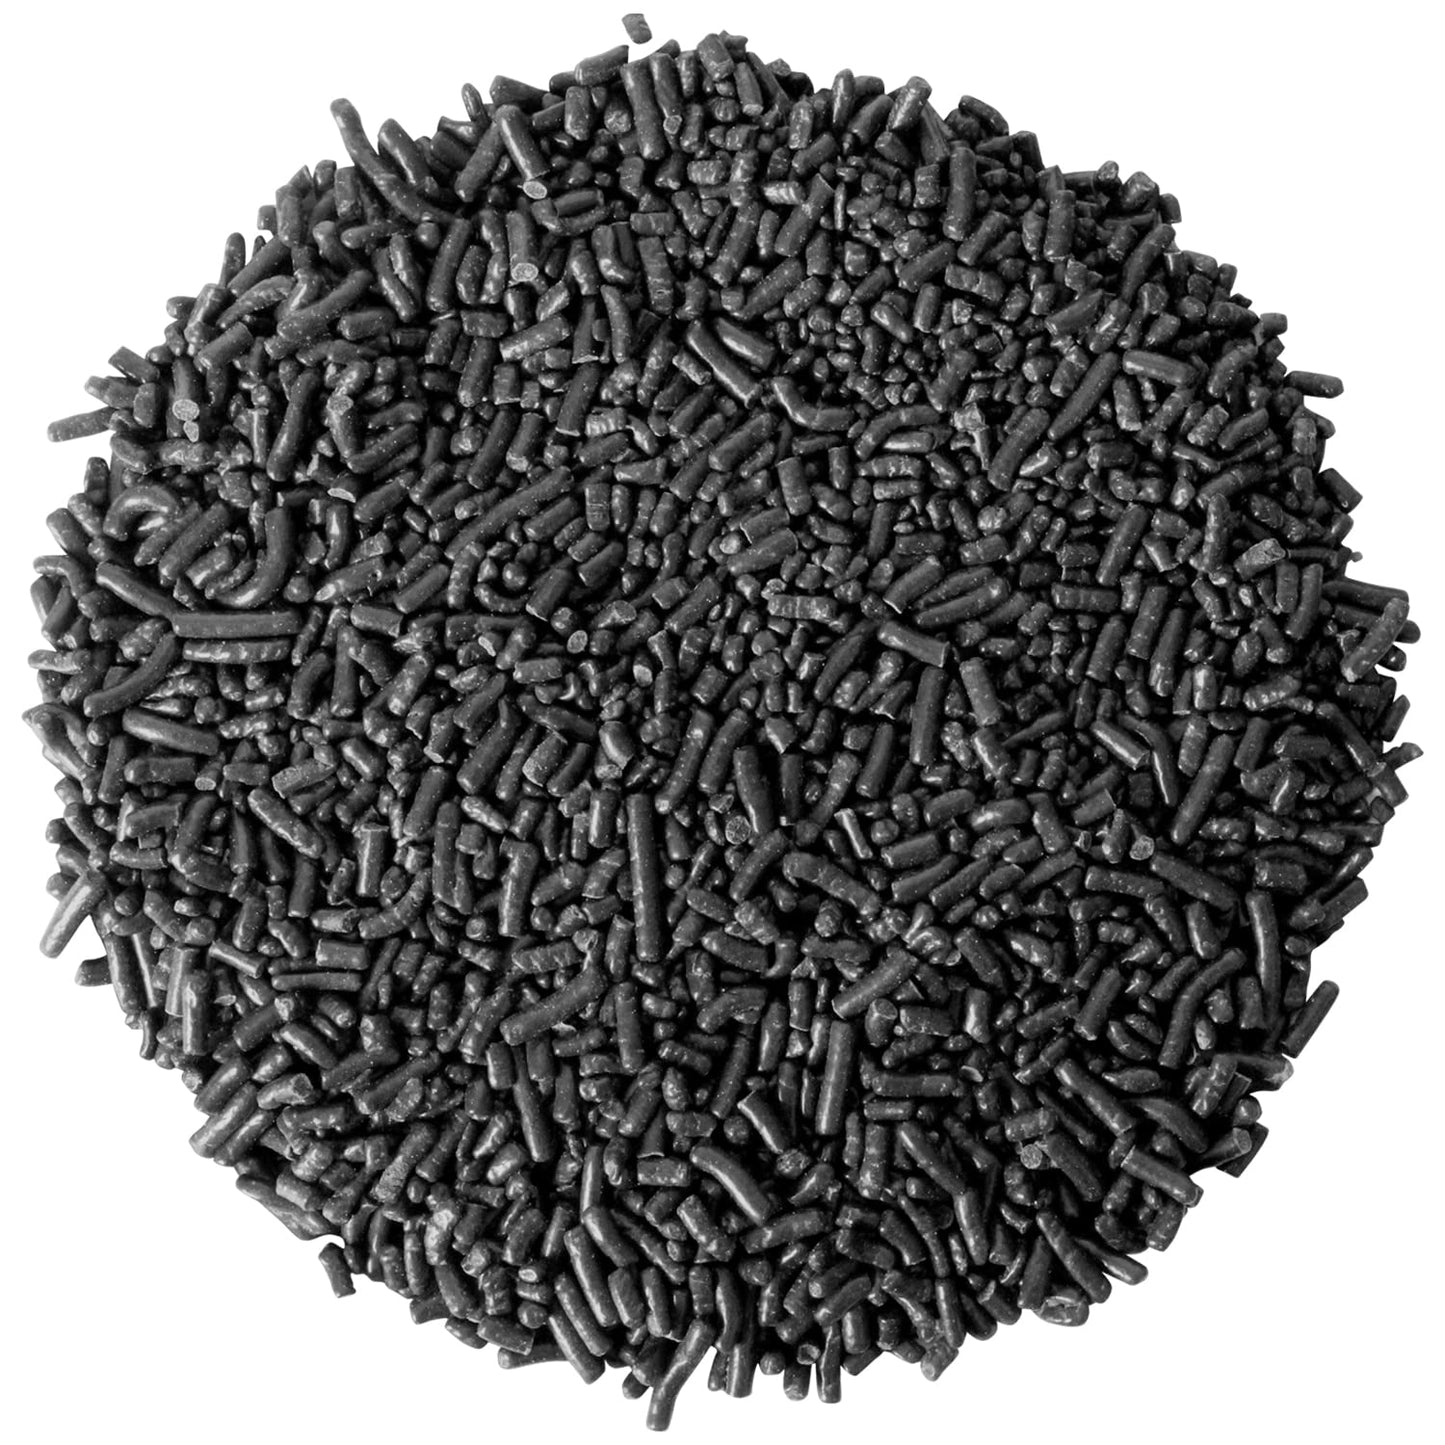 A Great Surprise Black Sprinkles - Outer Space Sprinkles - 1.6 Pounds - Bulk Black Jimmies for Desserts, Baking, Cakes, Cupcakes.